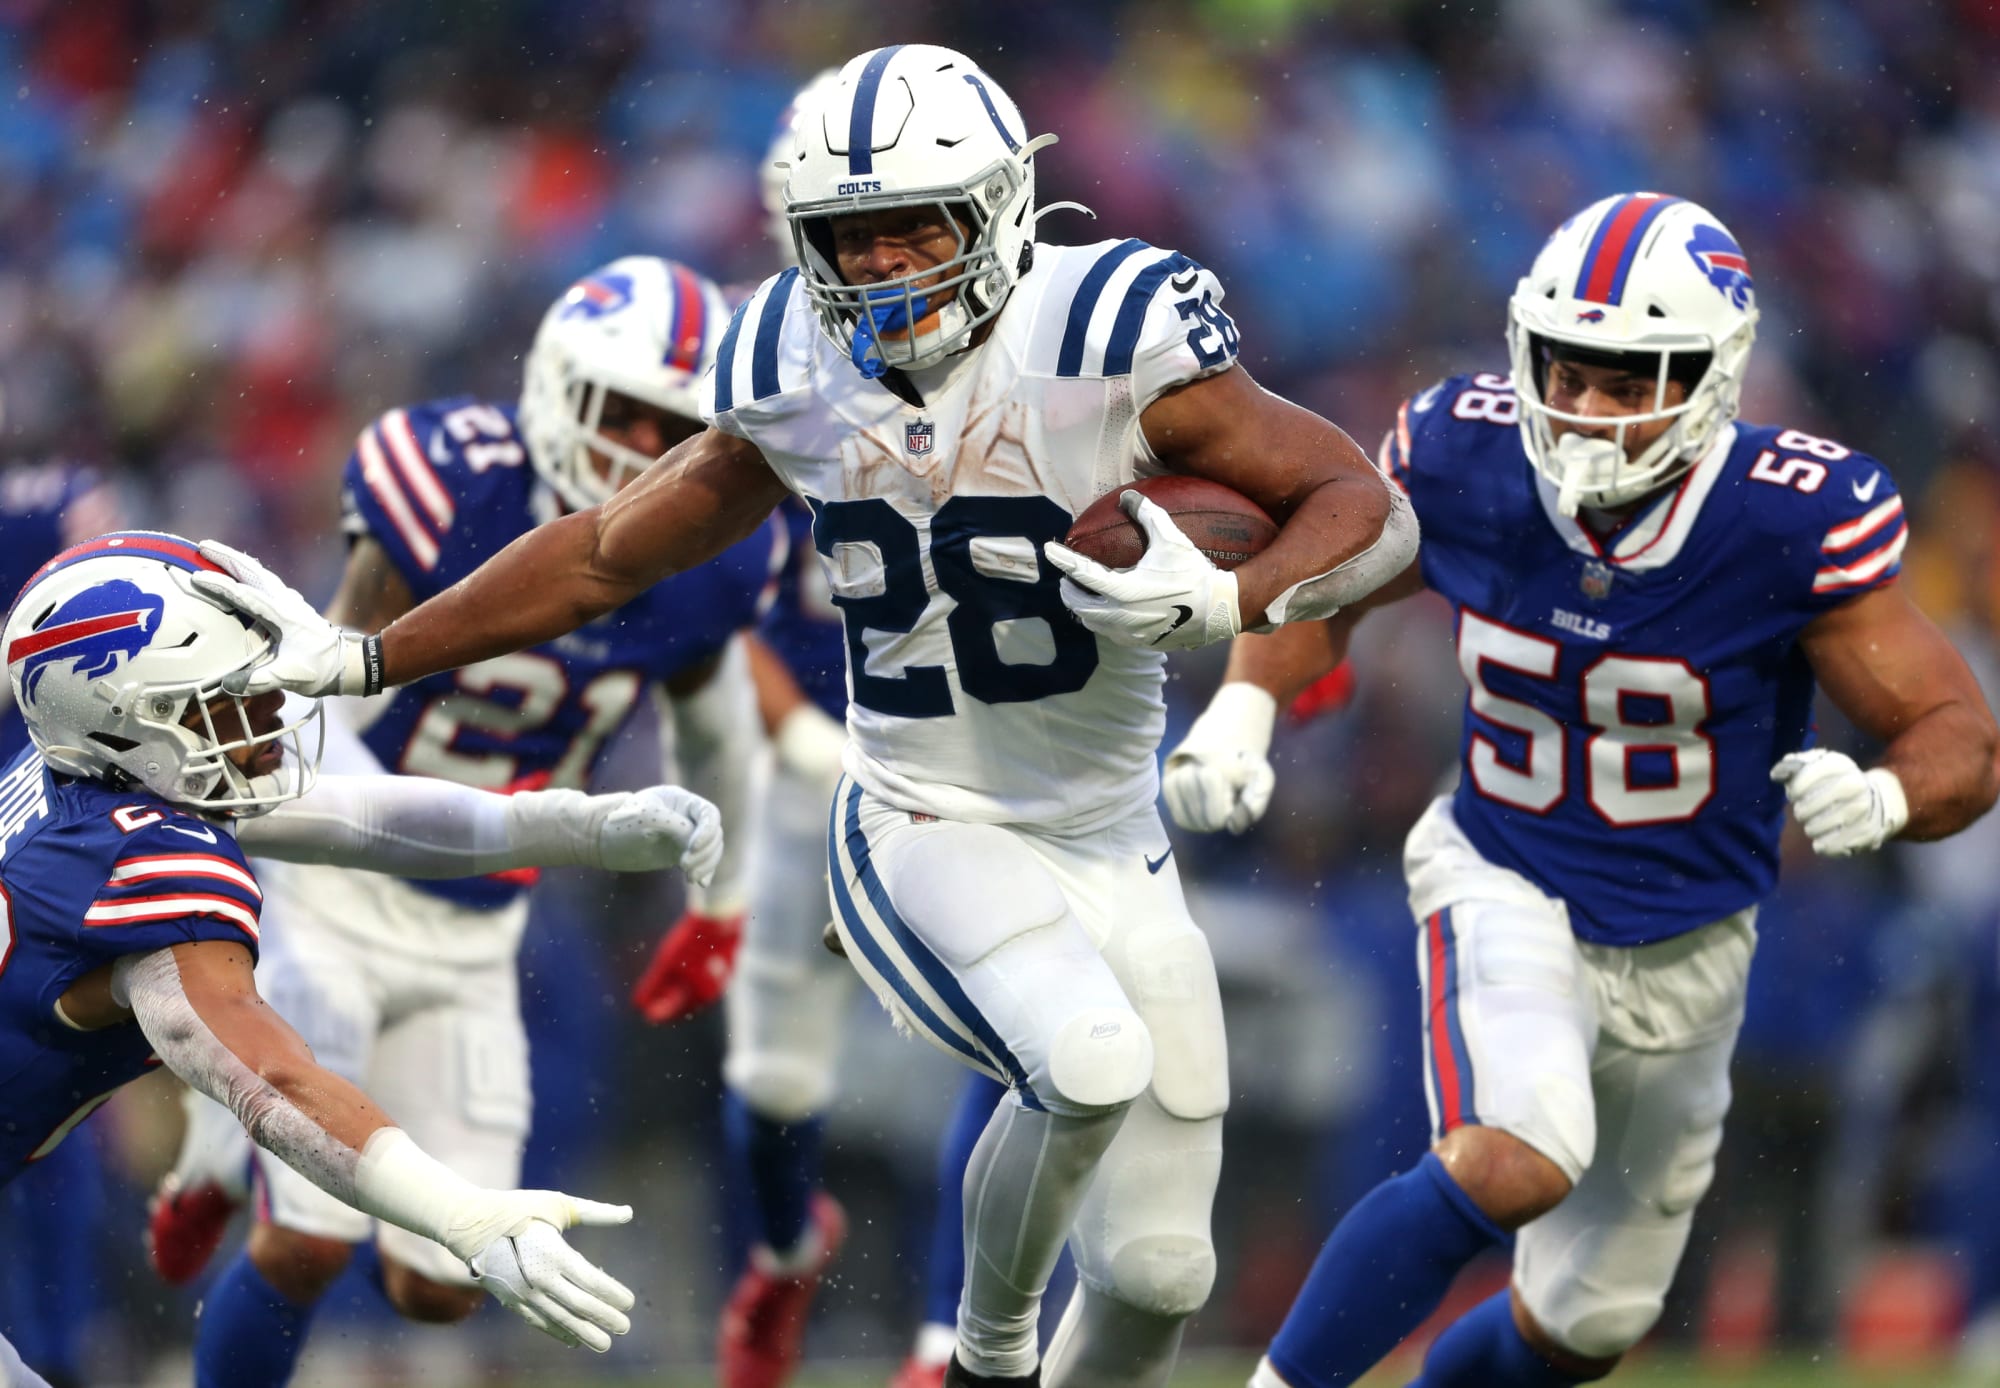 Colts vs. Bills preseason game: Start time and how to watch